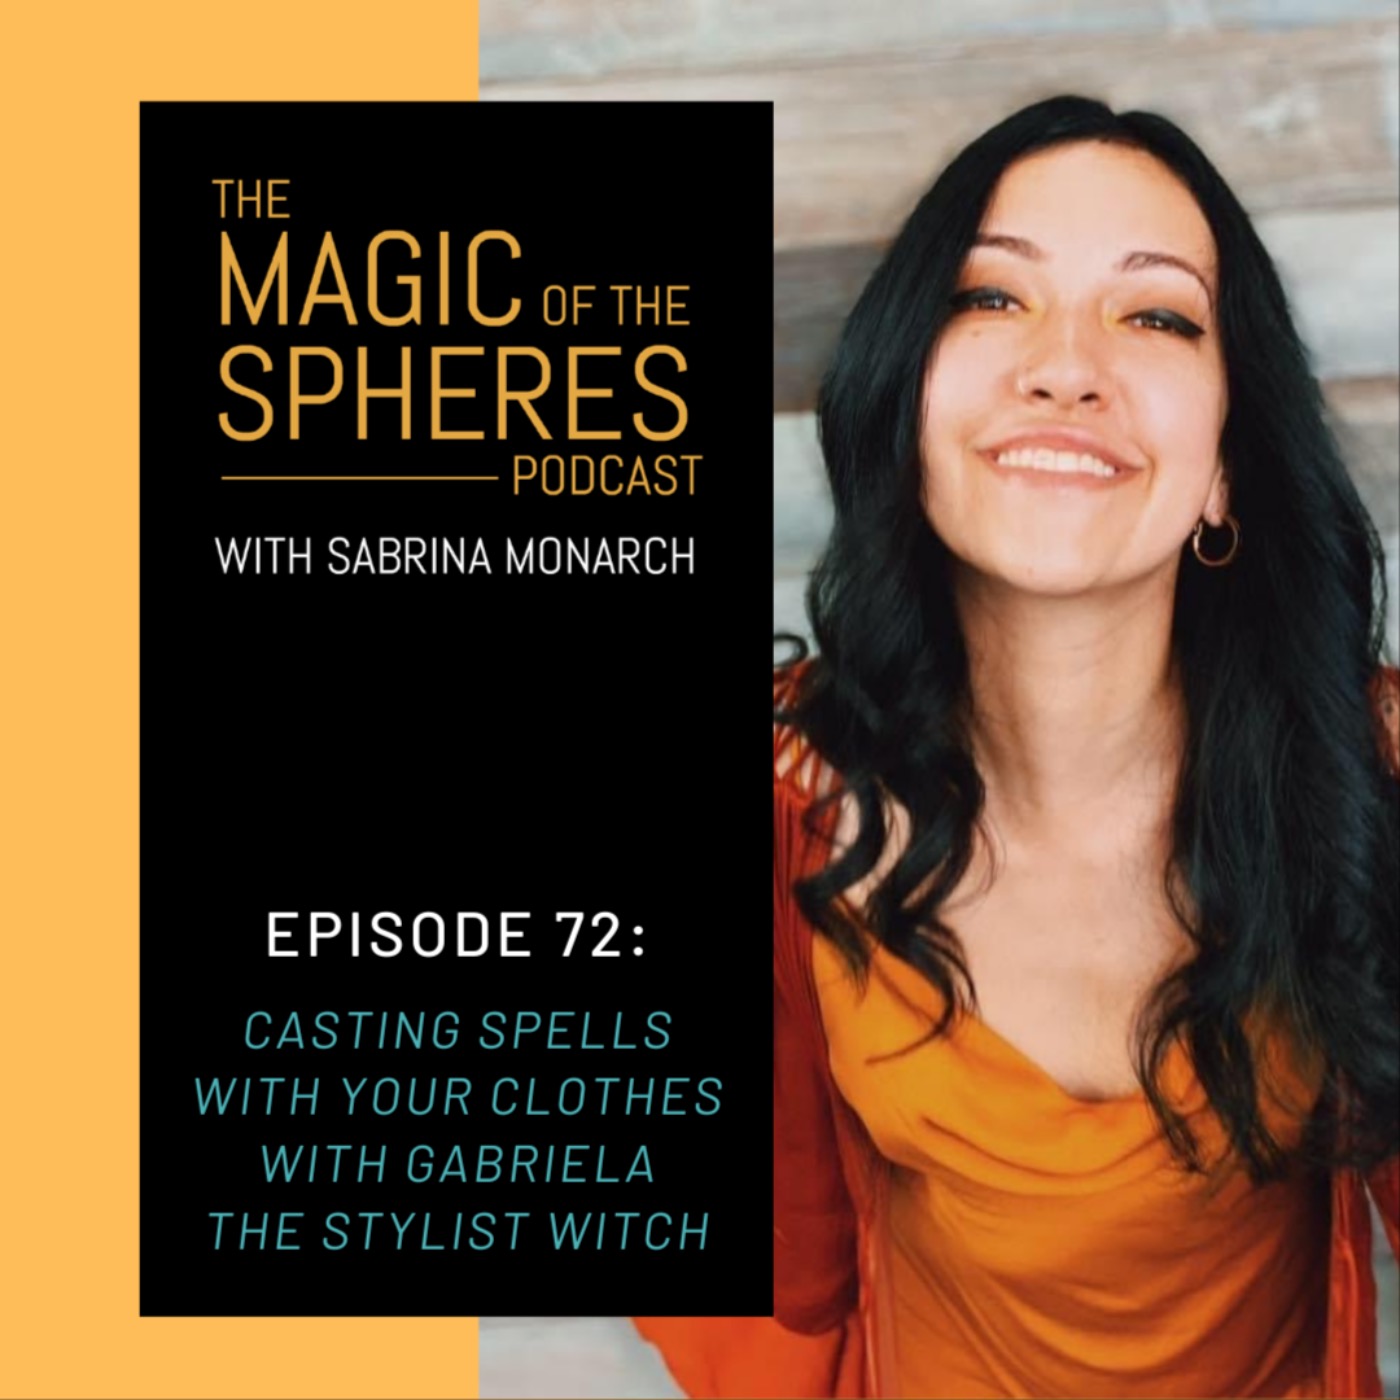 Casting Spells with your Clothes with Gabriela The Stylist Witch